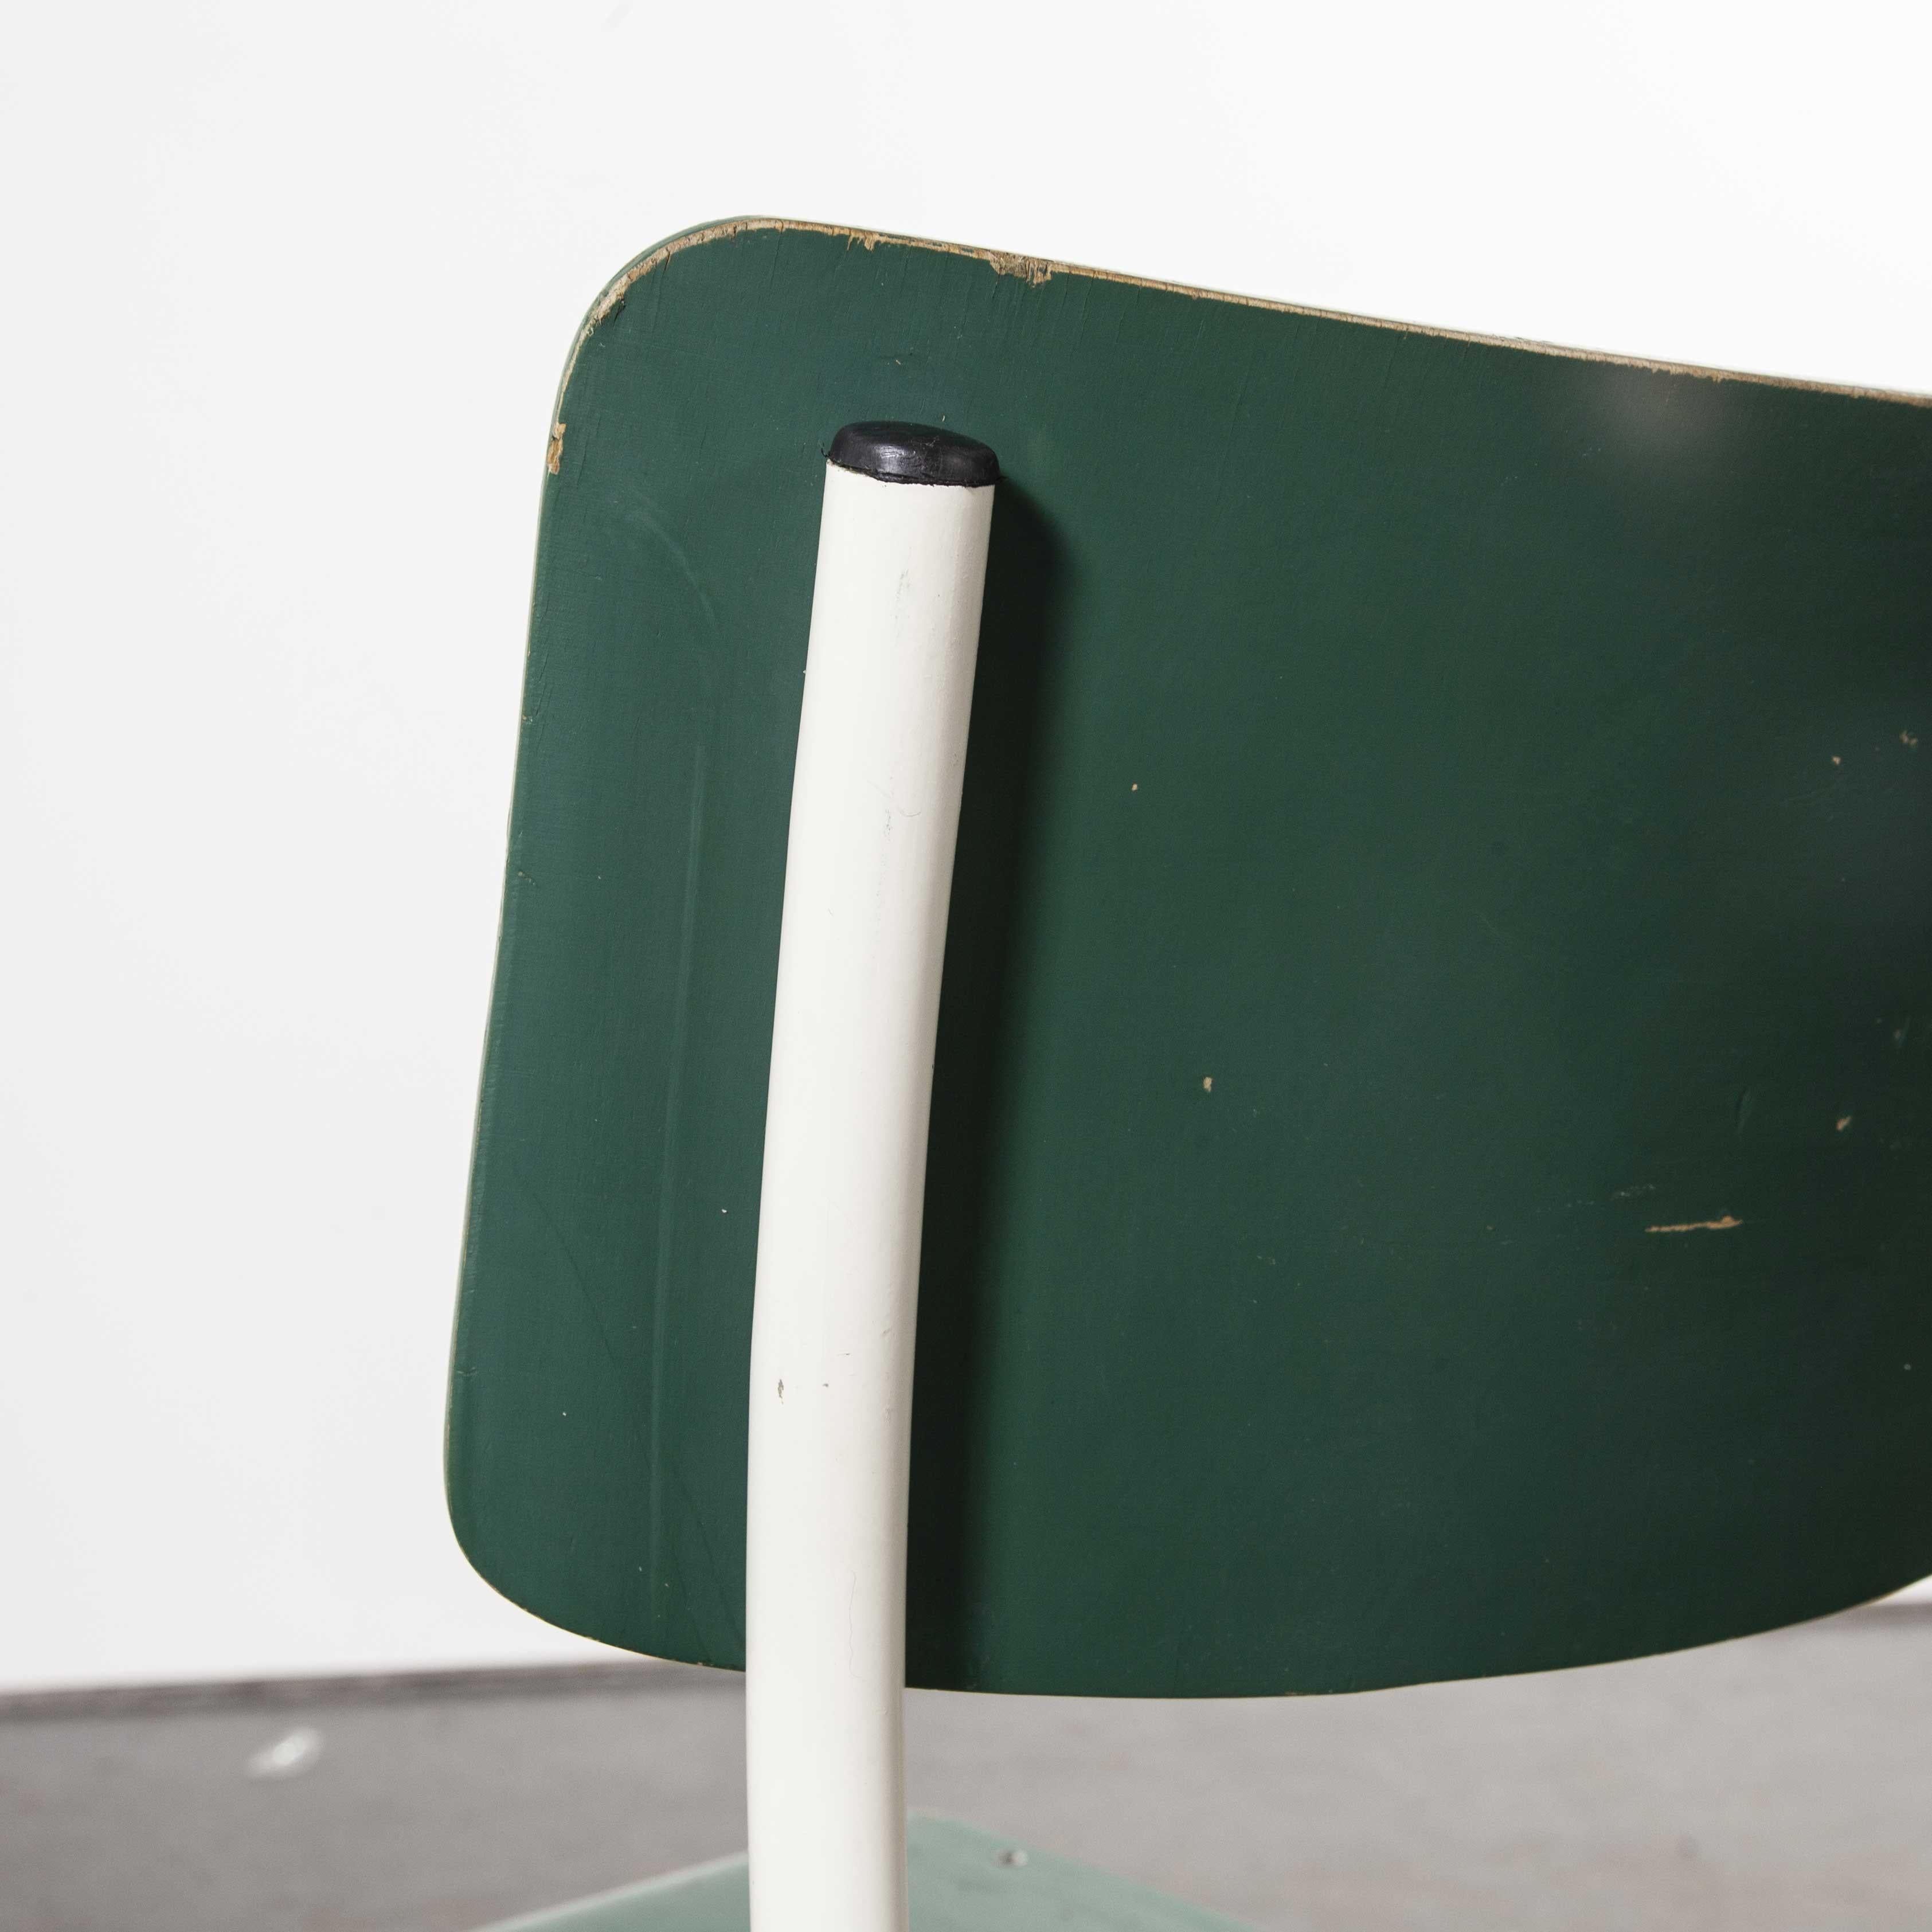 1970's Thonet Stacking Dining Chairs For The German Army - Green - Good Qty For Sale 10